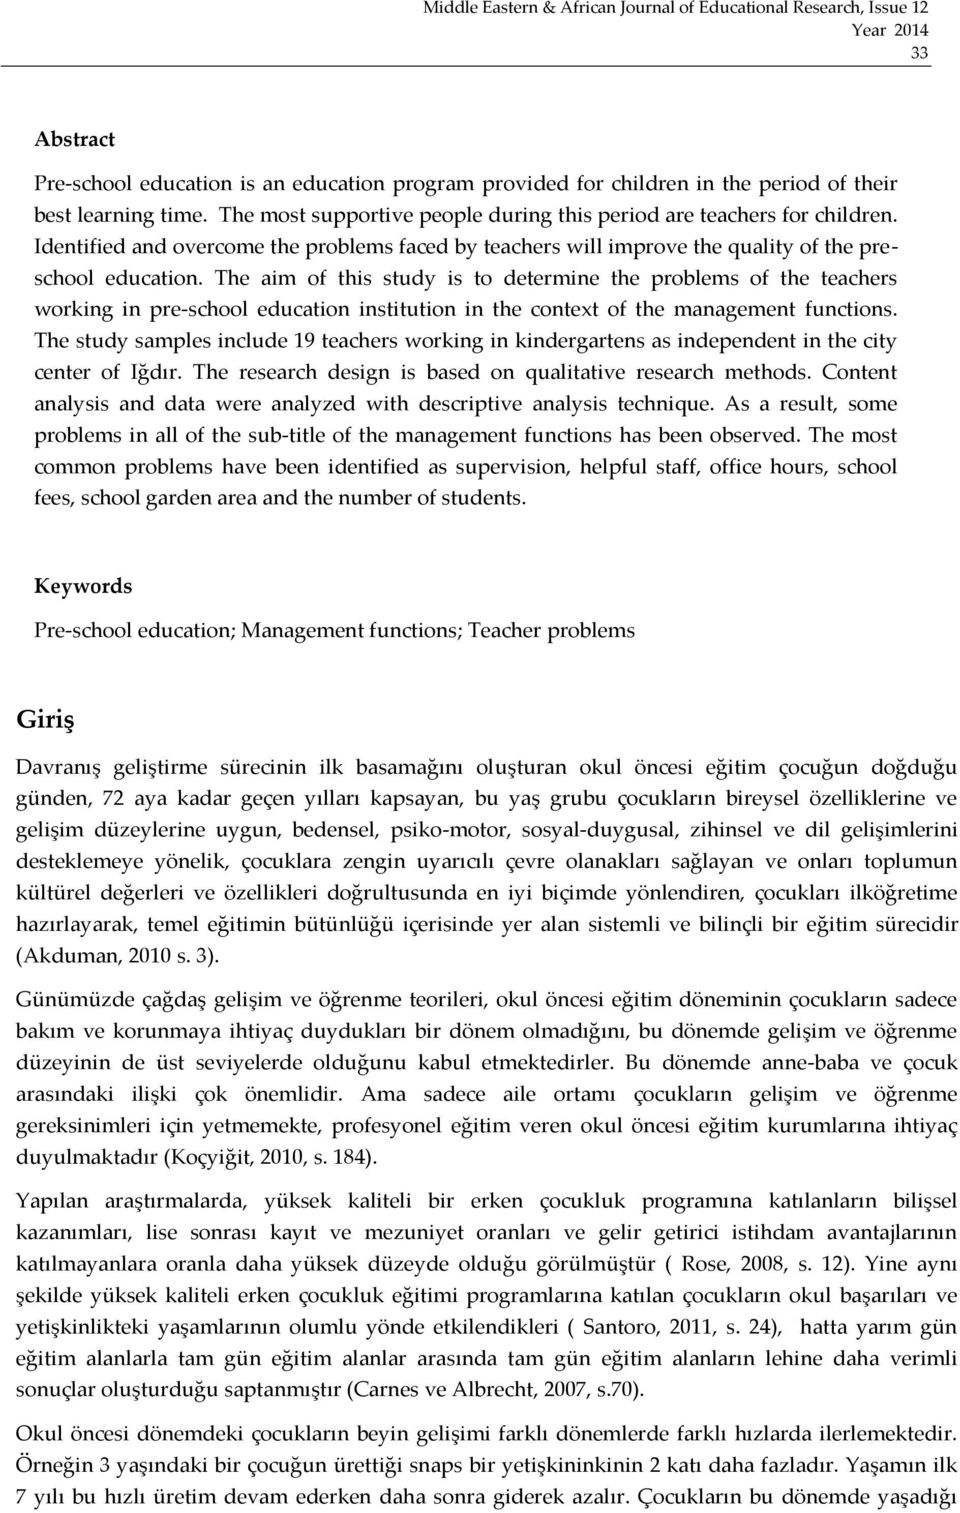 The aim of this study is to determine the problems of the teachers working in pre-school education institution in the context of the management functions.